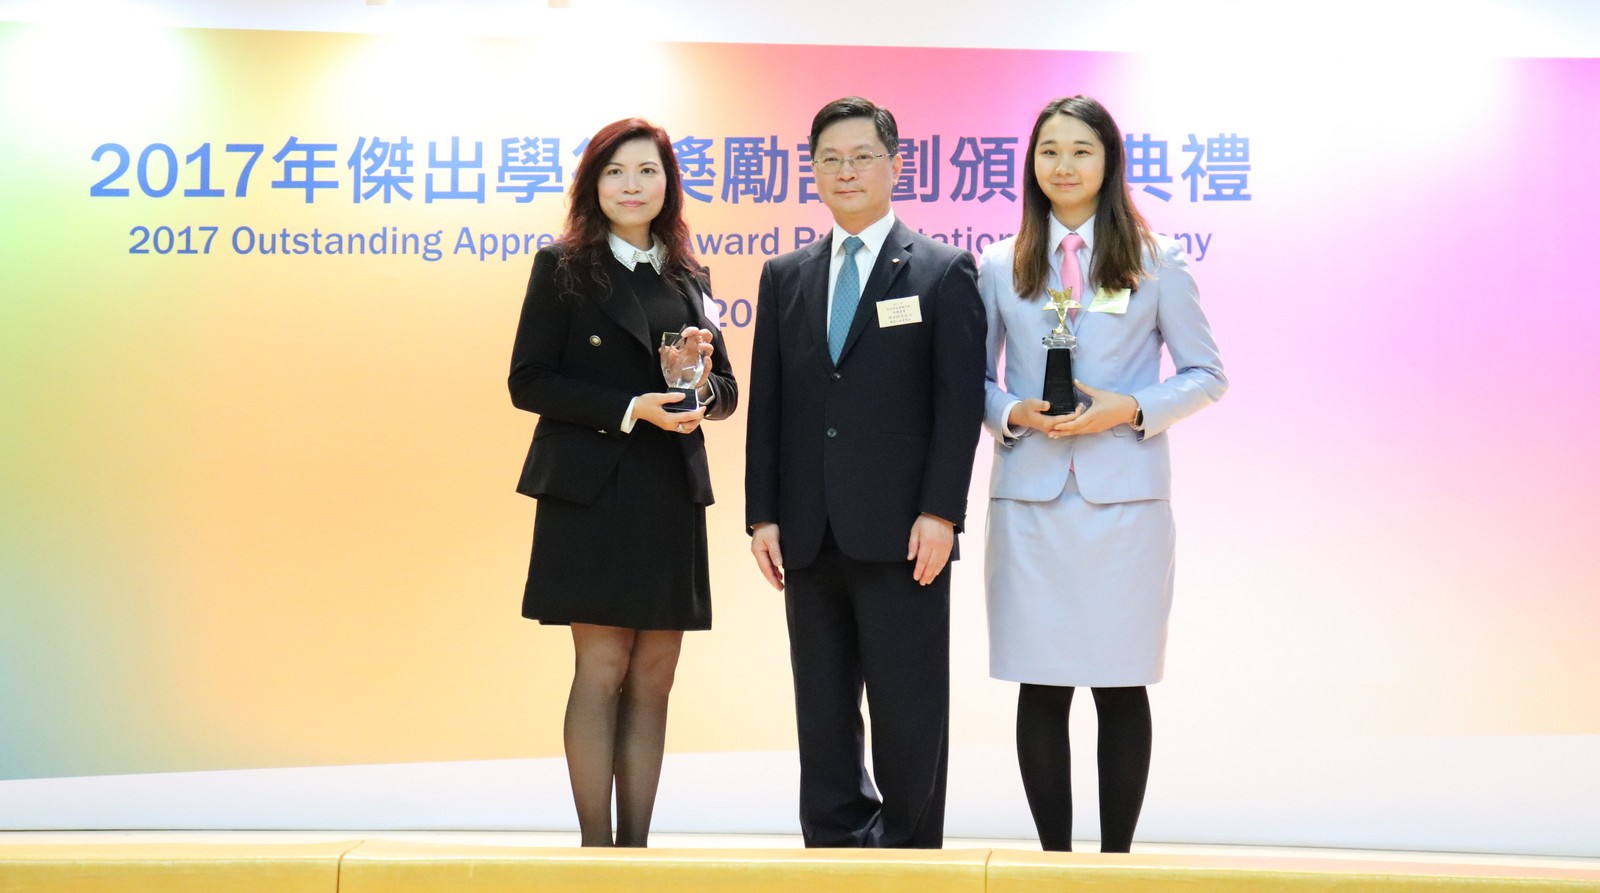 Ms Ginny Kong (right) is one of the Outstanding Apprentice winners